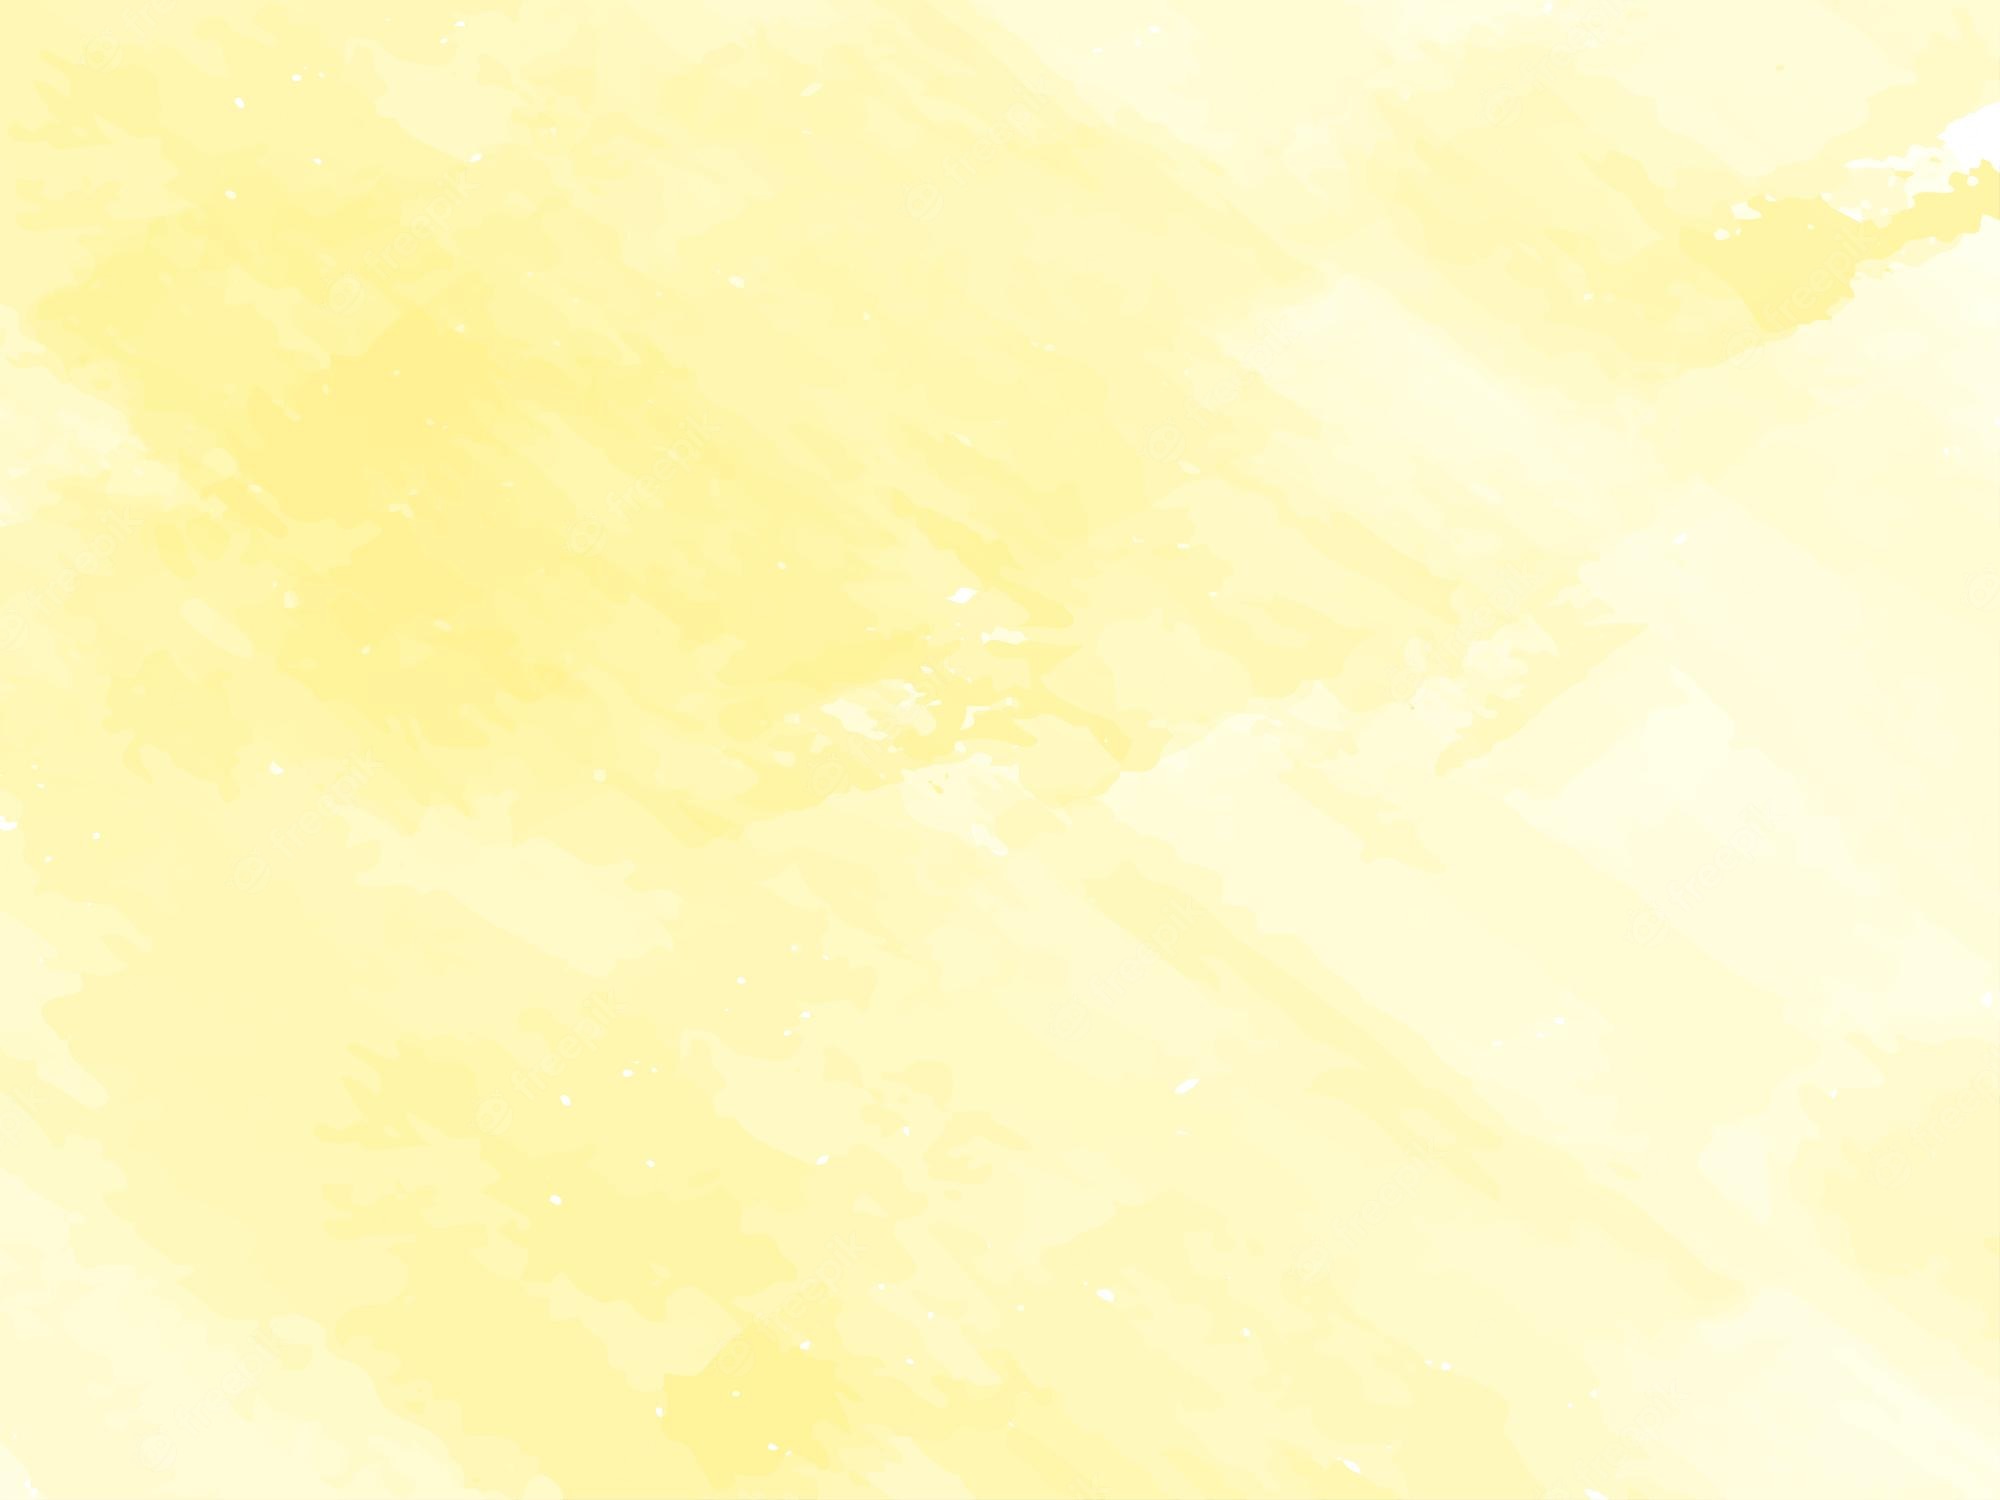 Yellow Paint Background Image. Free Vectors, & PSD